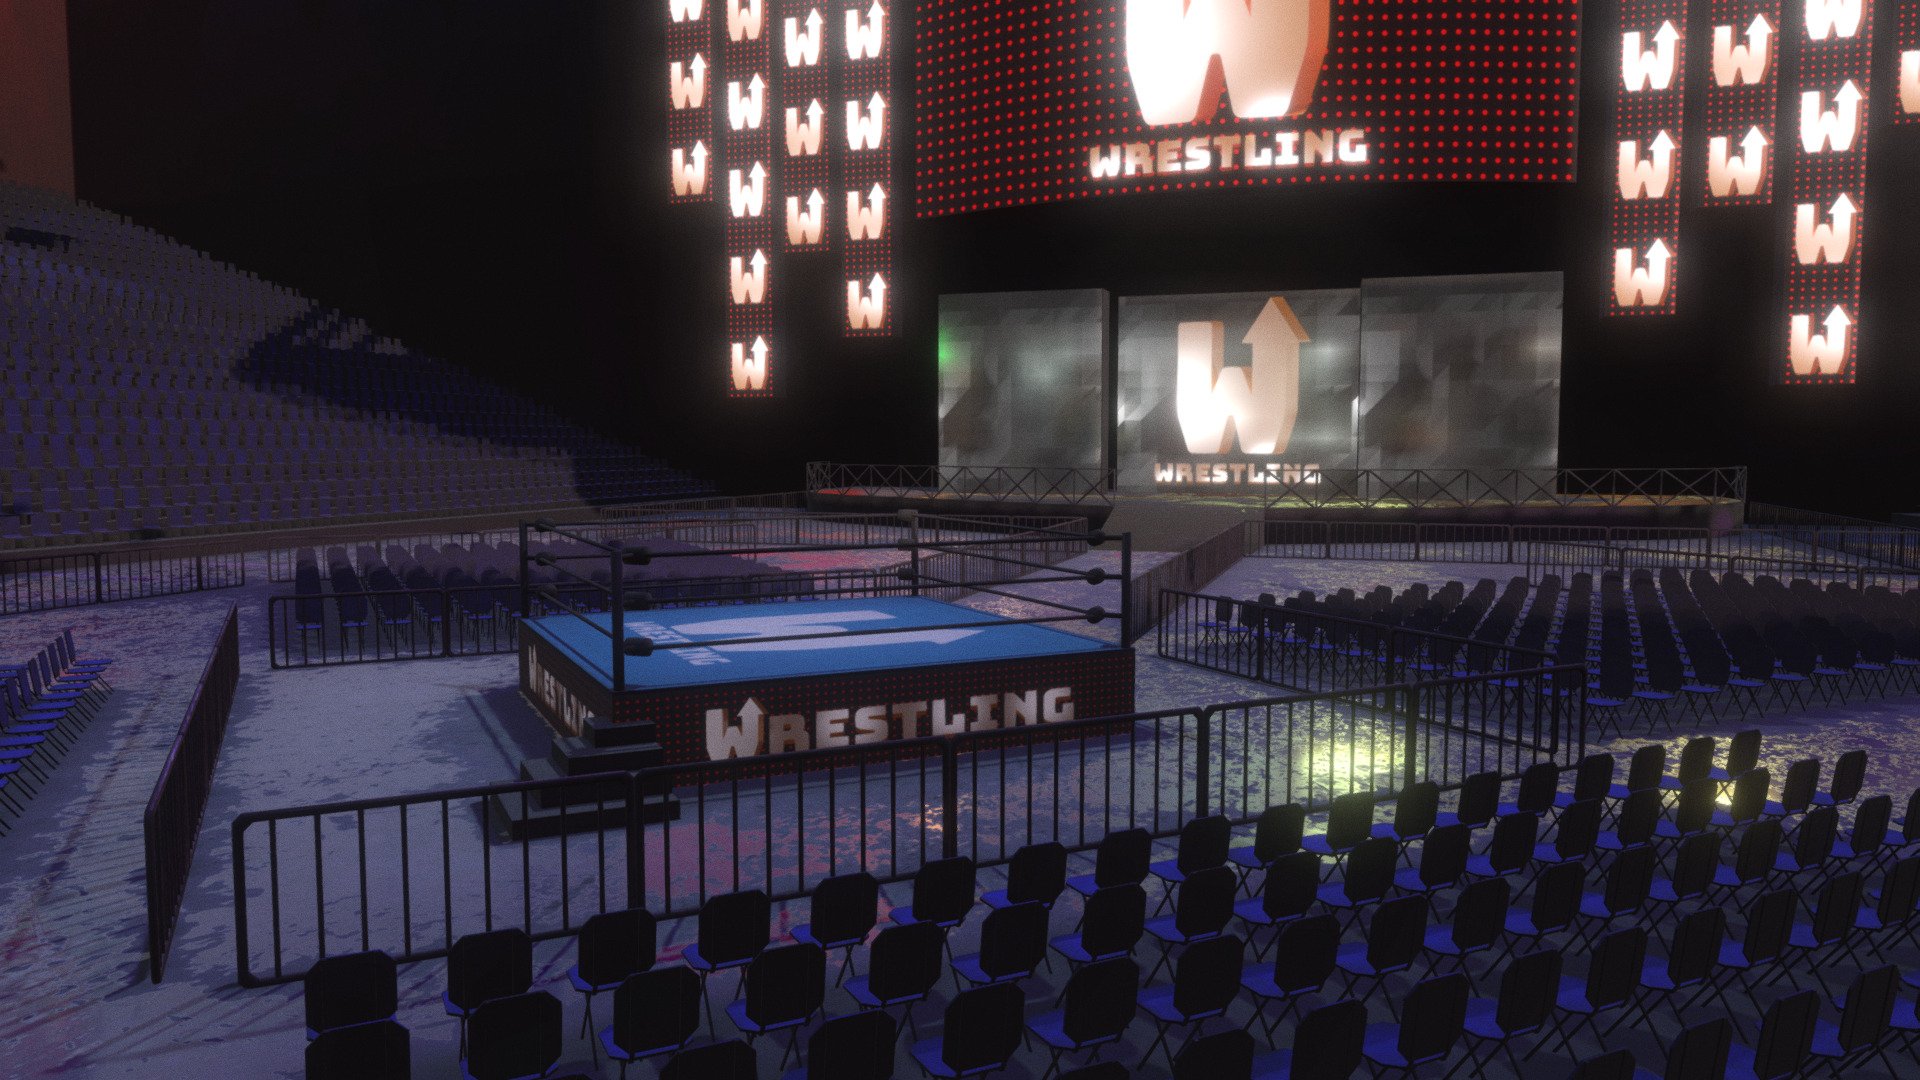 VR Wrestling Ring modeled in Blender and textured in Substance Painter.

The scene has baked in textures 3d model